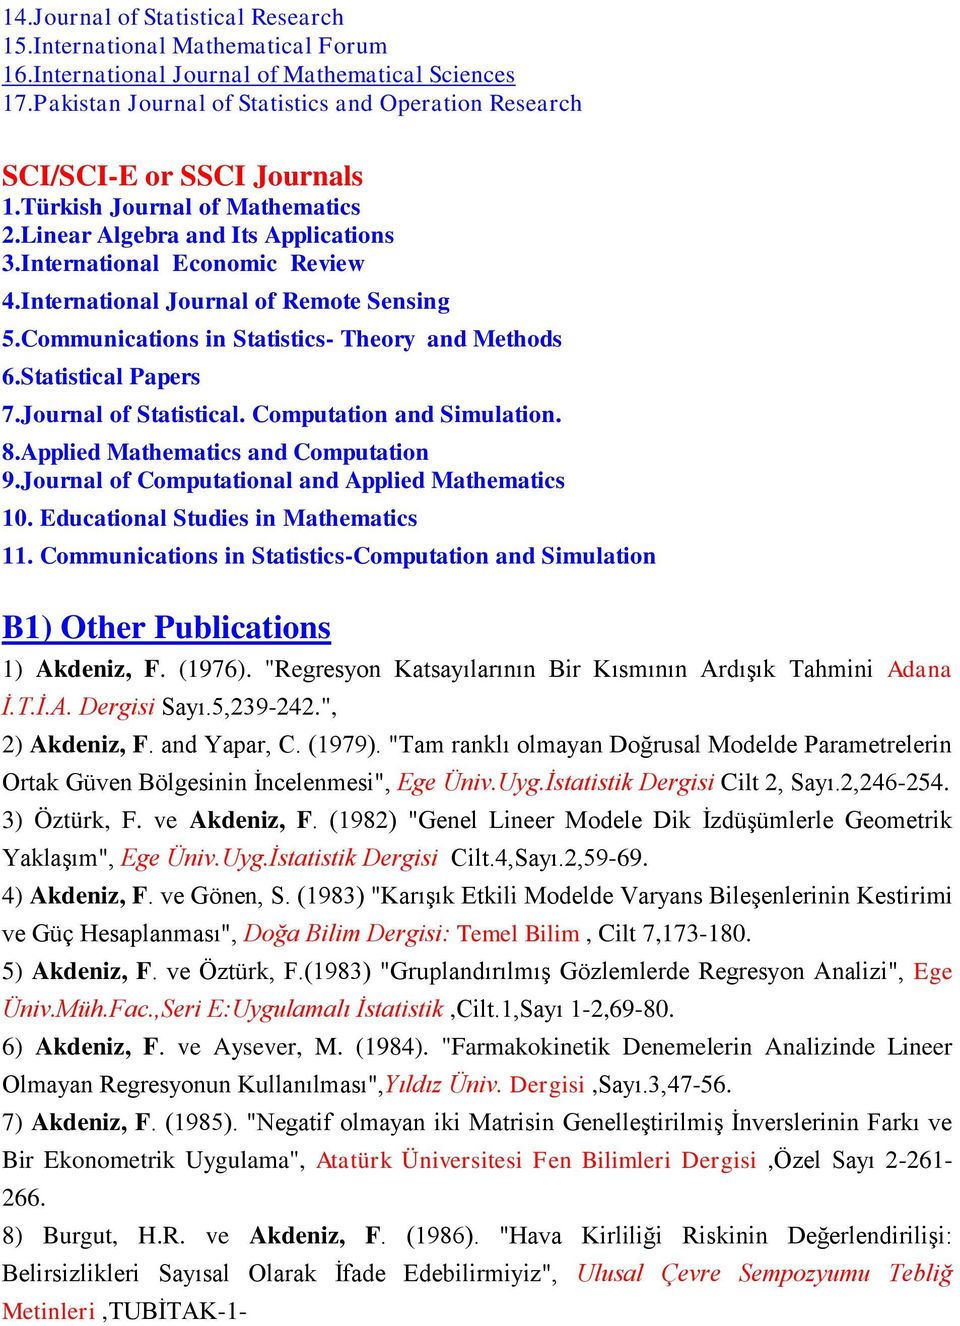 International Journal of Remote Sensing 5.Communications in Statistics- Theory and Methods 6.Statistical Papers 7.Journal of Statistical. Computation and Simulation. 8.